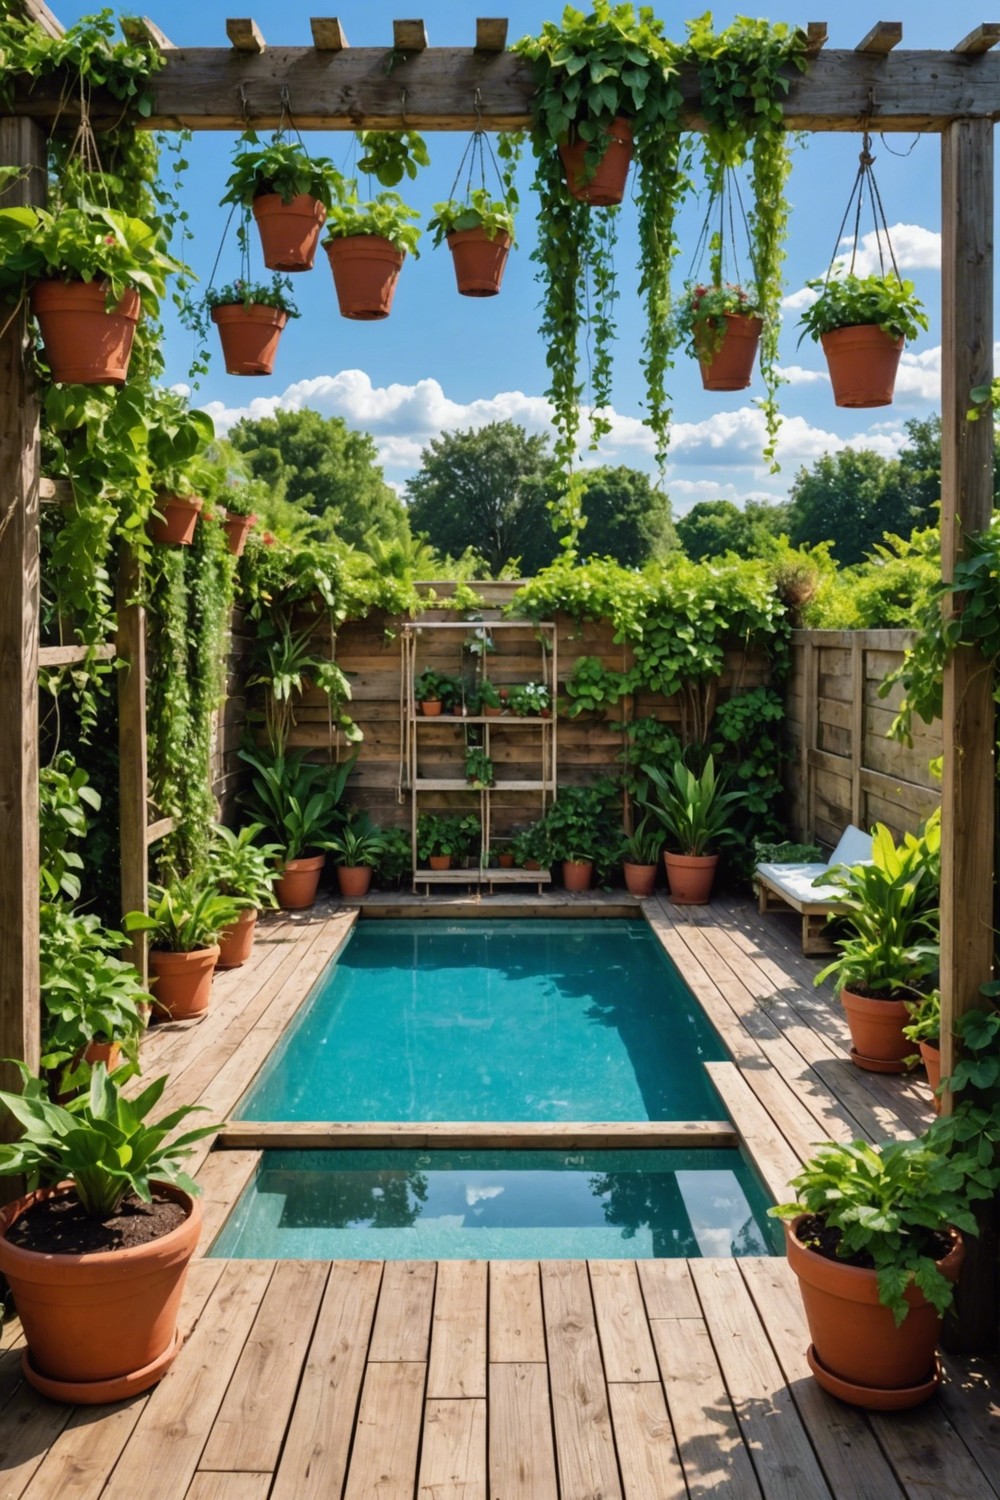 Pallet Pool Decks with Hanging Potted Plants